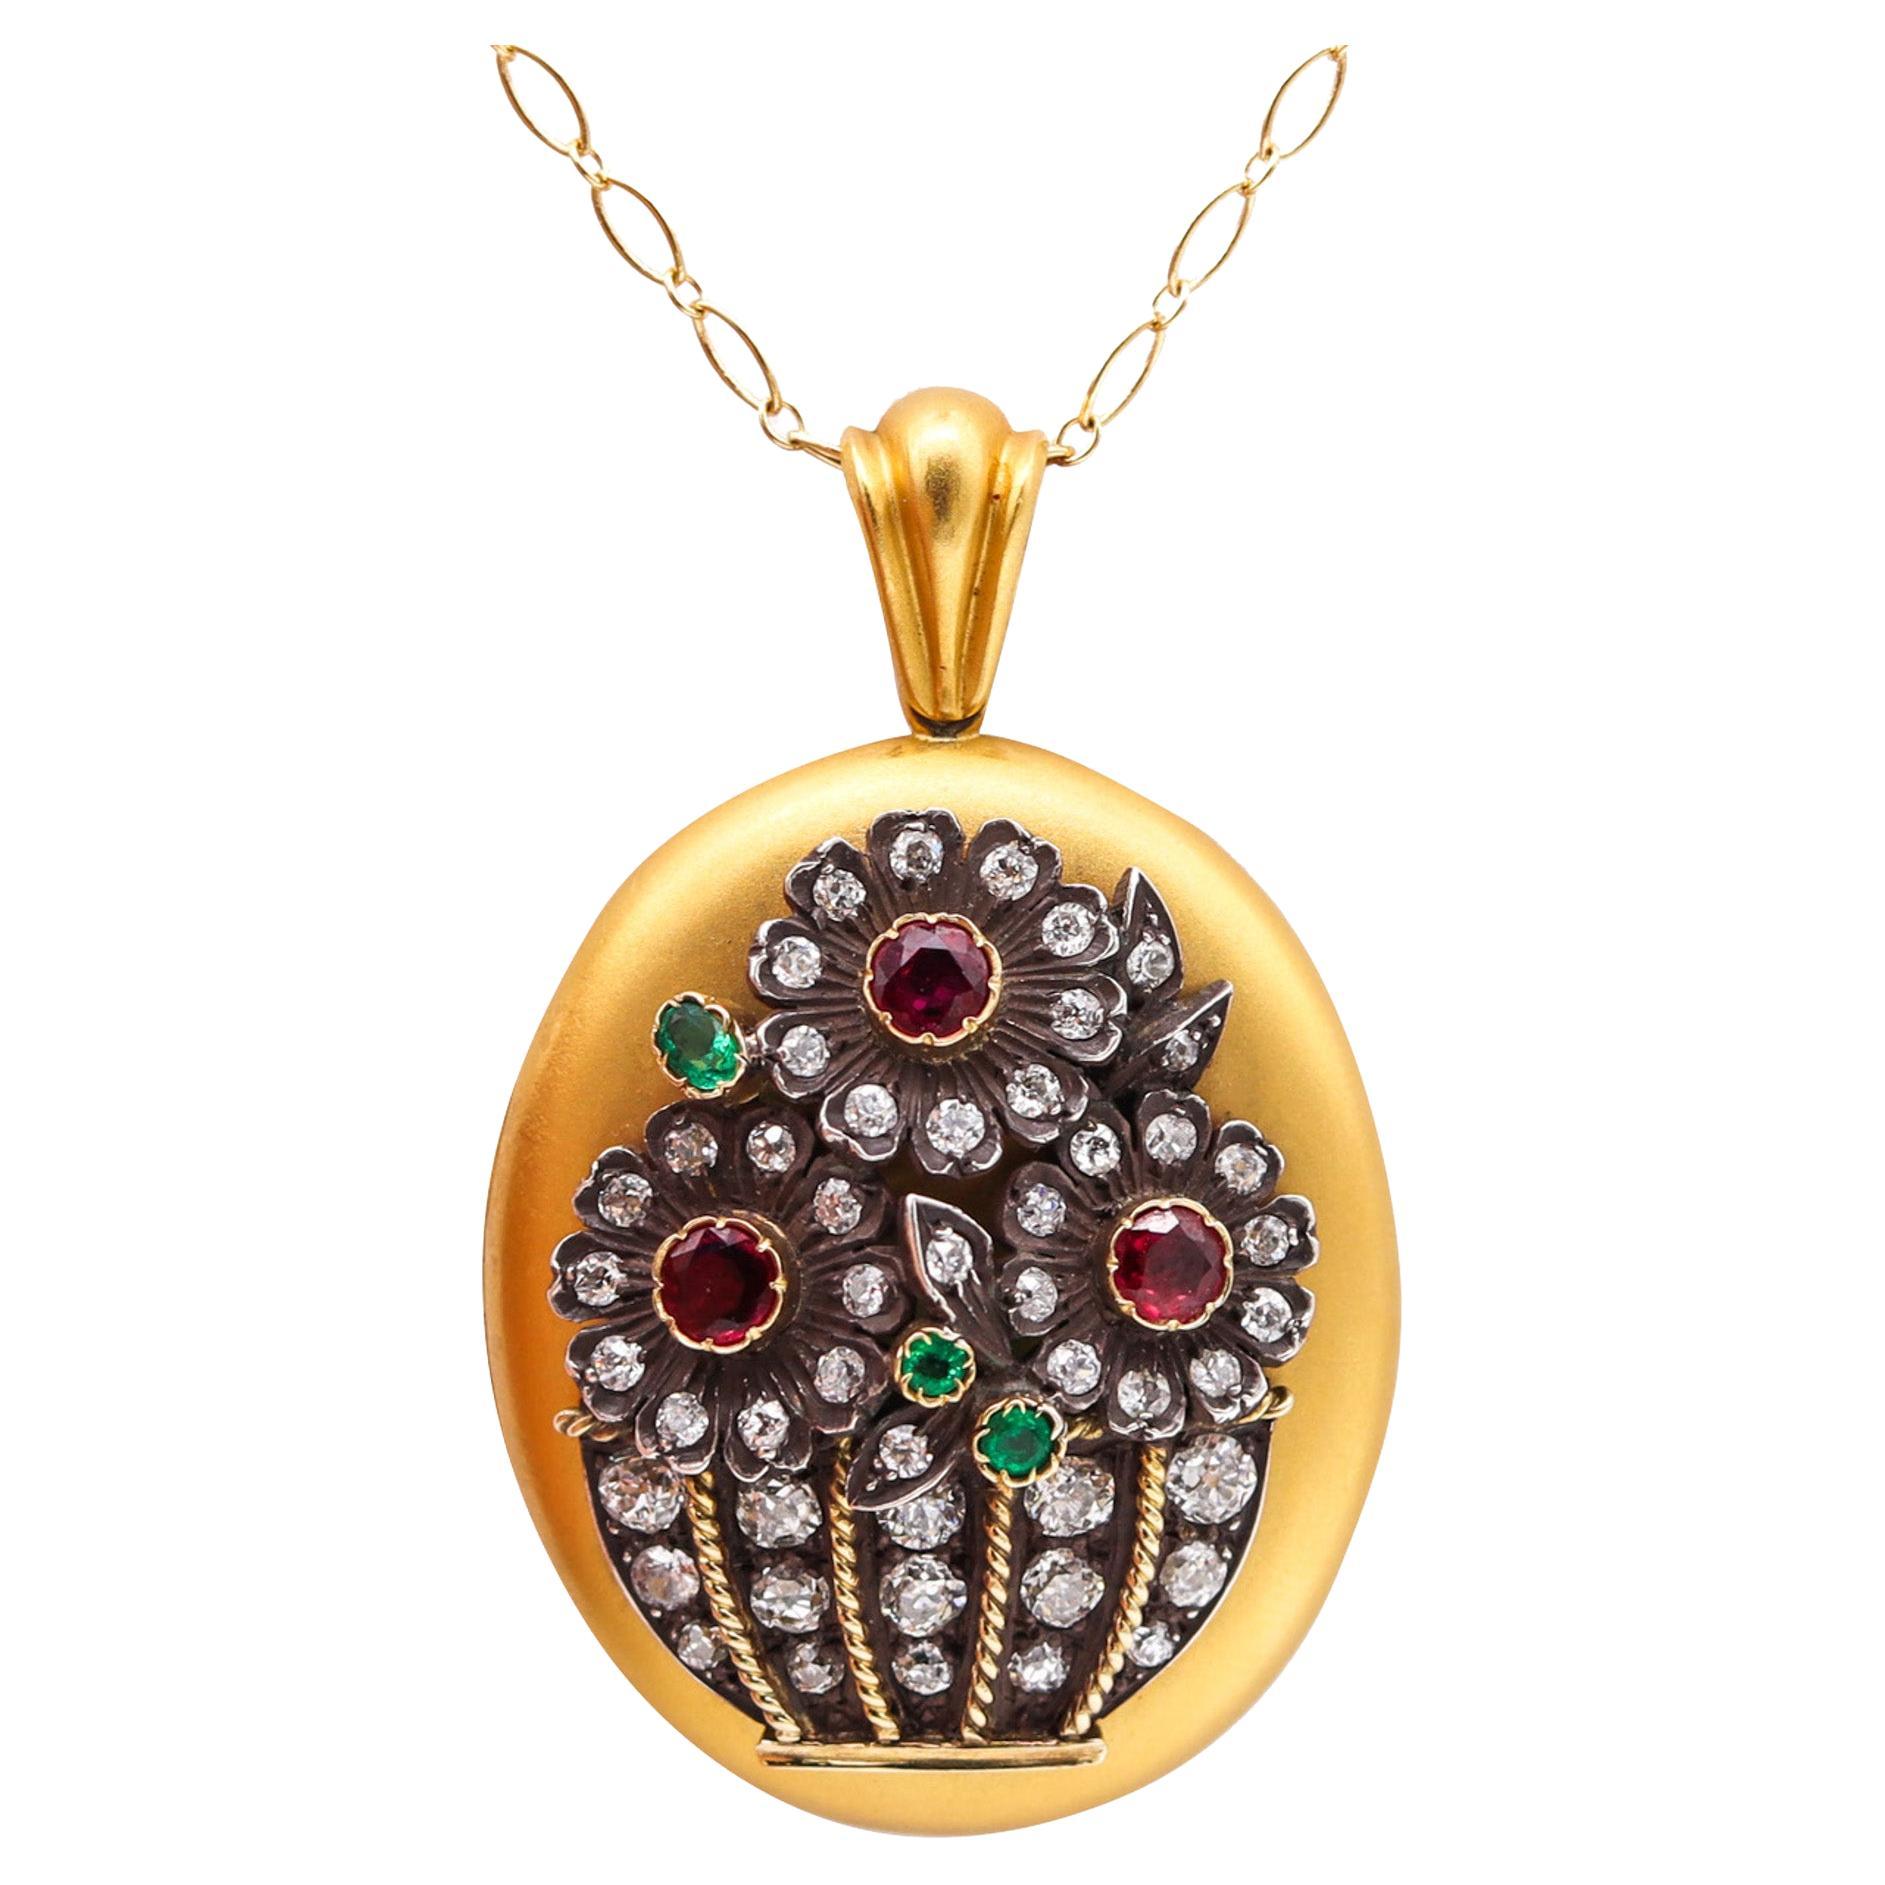 Victorian 1890 Pendant Locket in 18kt Gold with 9.44ctw Diamonds Rubies Emerald